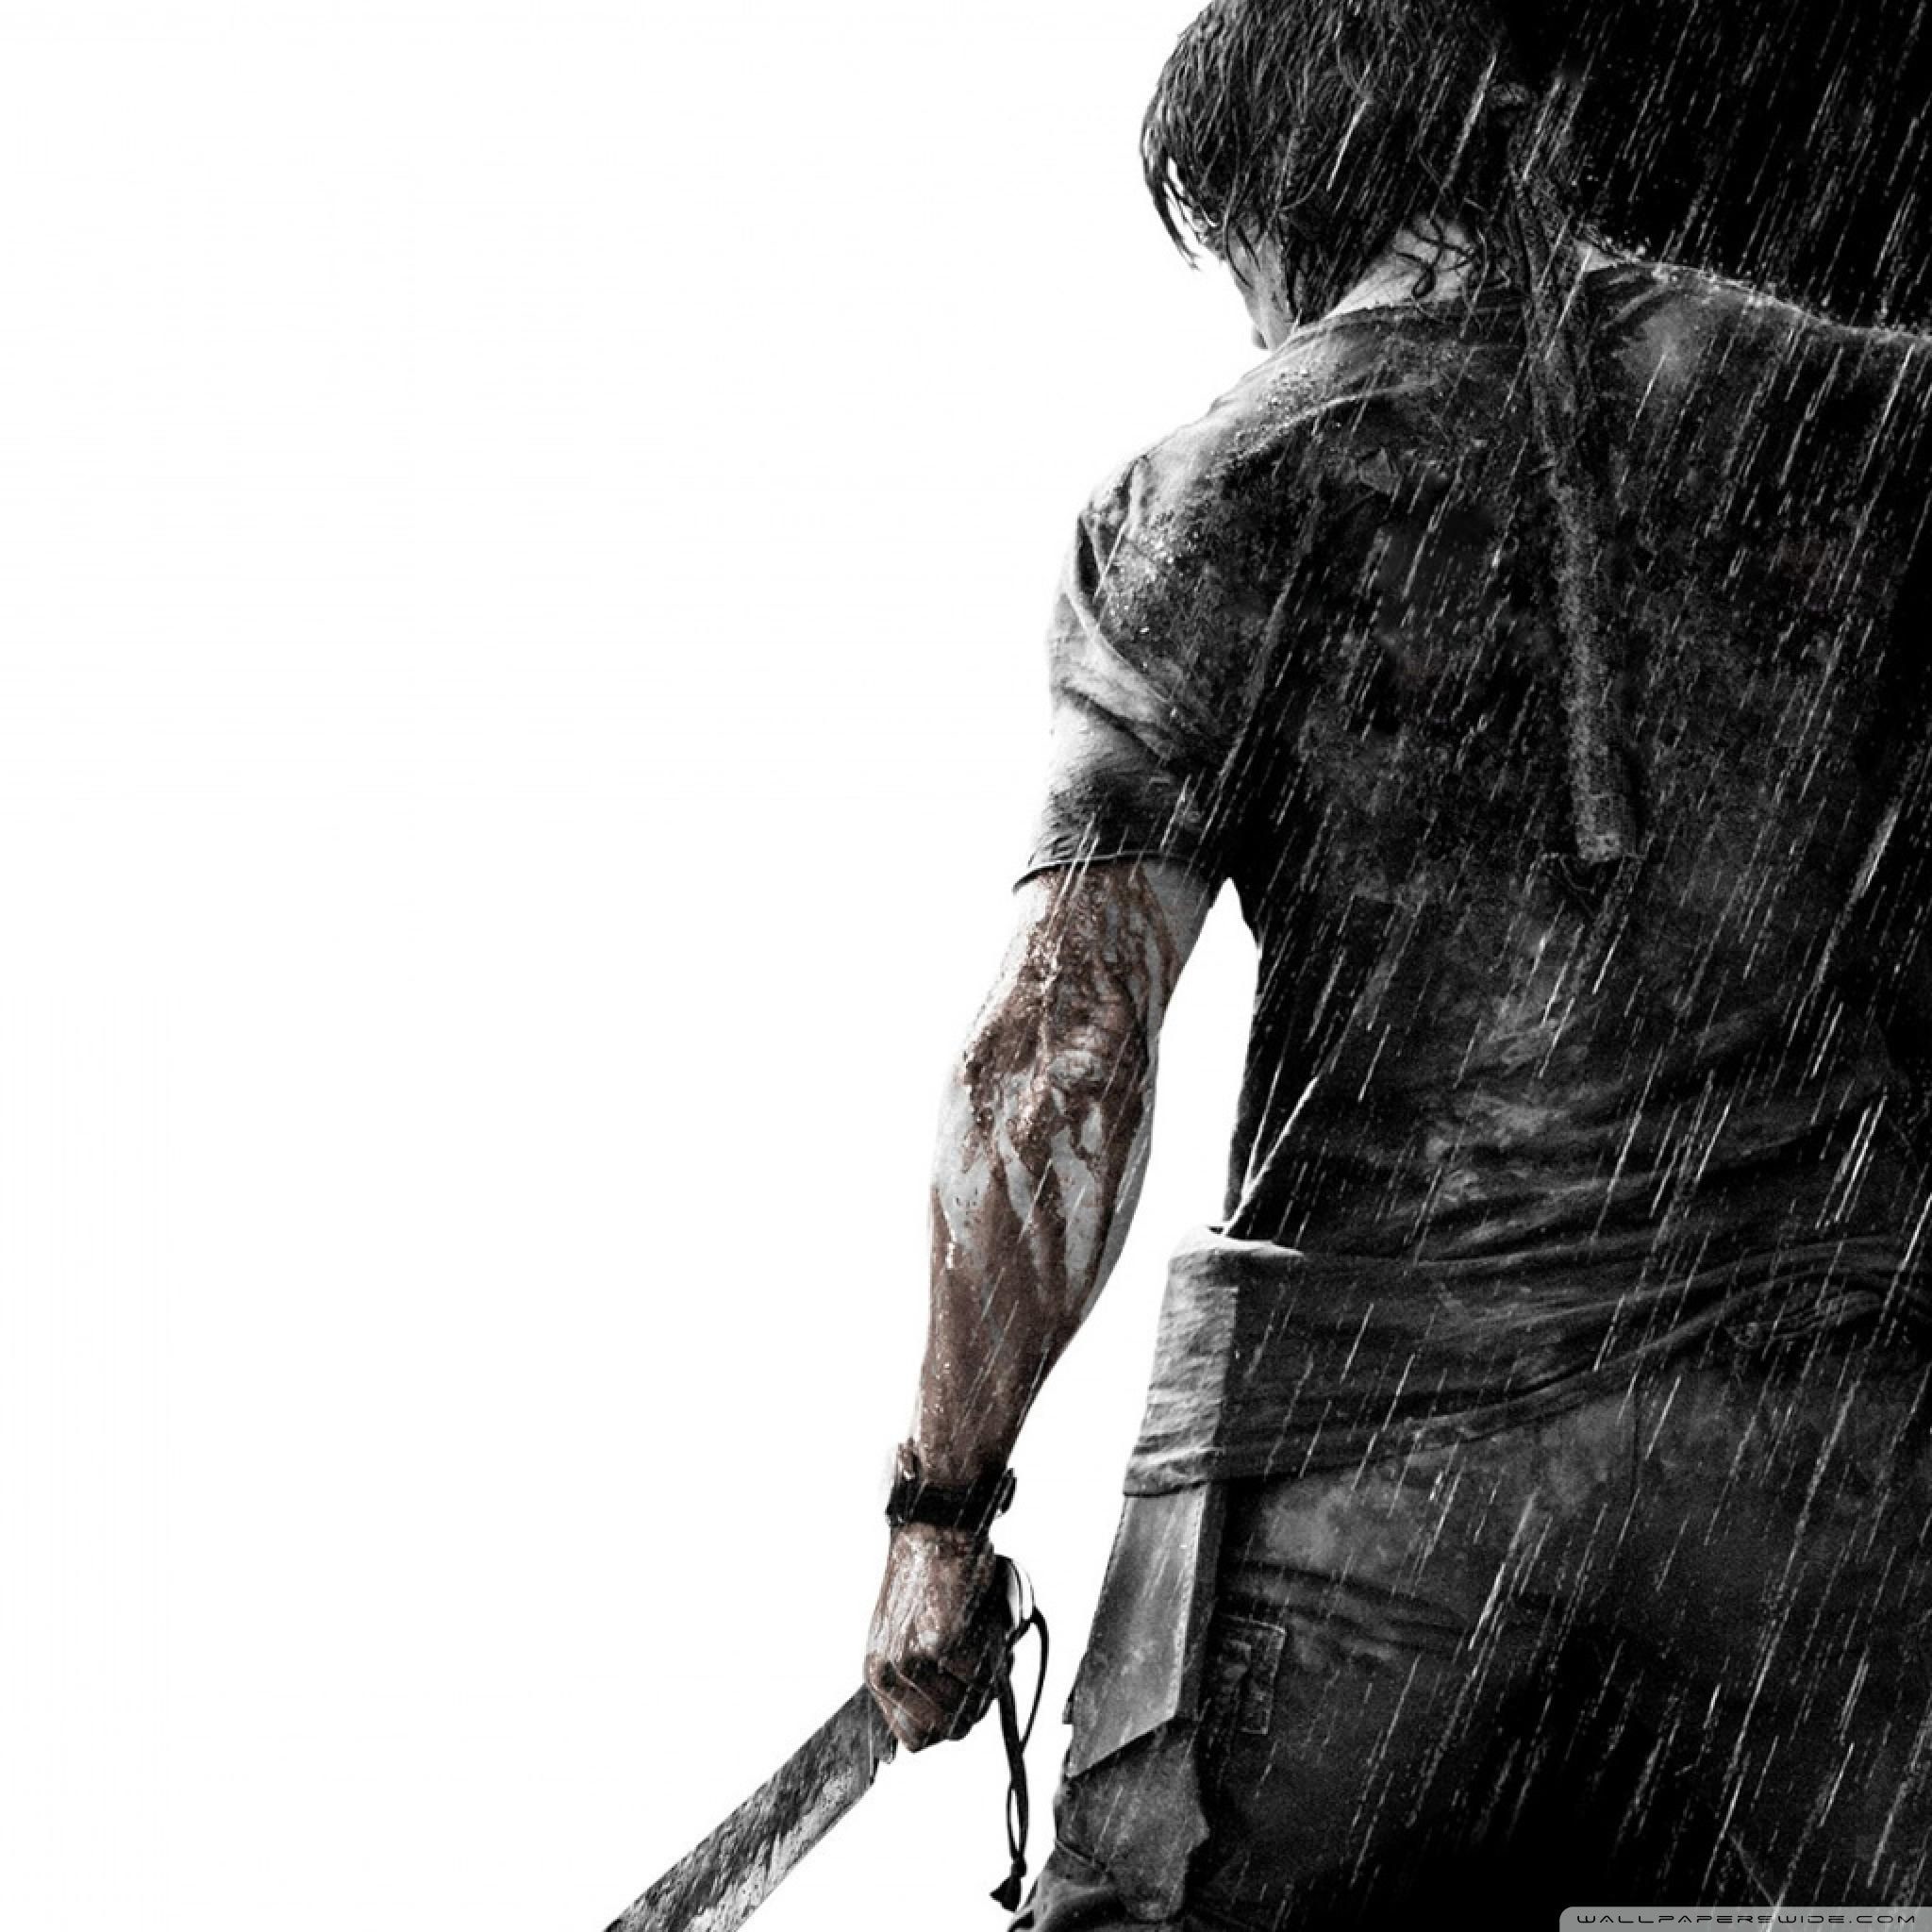 2048x2048 Full HD Wallpapers: Rambo Wallpapers, Rambo Backgrounds For | Beautiful  Wallpapers | Pinterest